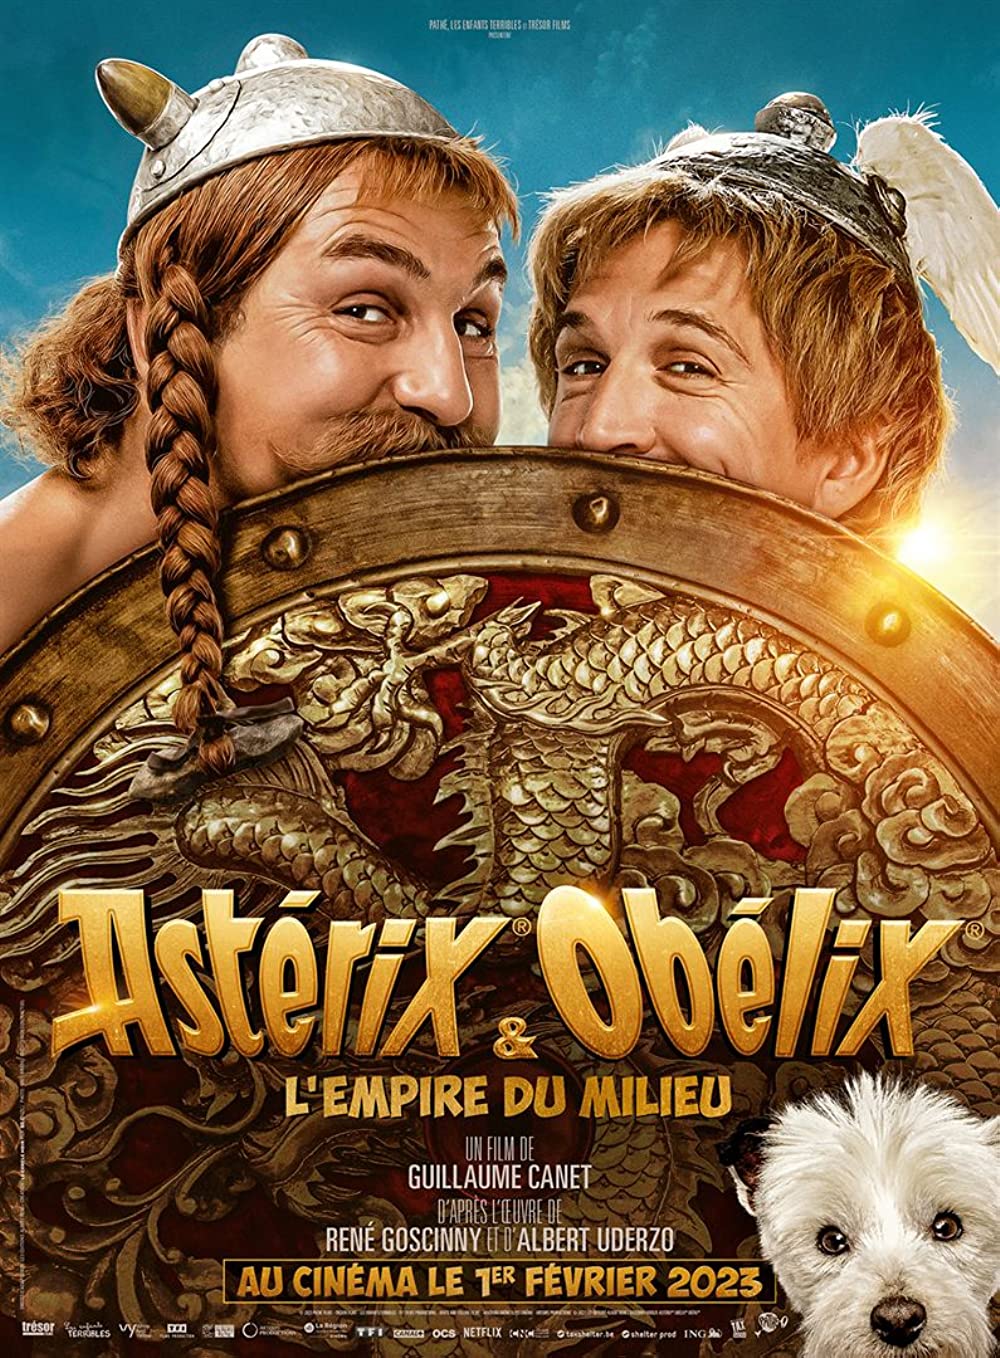 Asterix & Obelix: The Middle Kingdom Mind-Blowing Ending